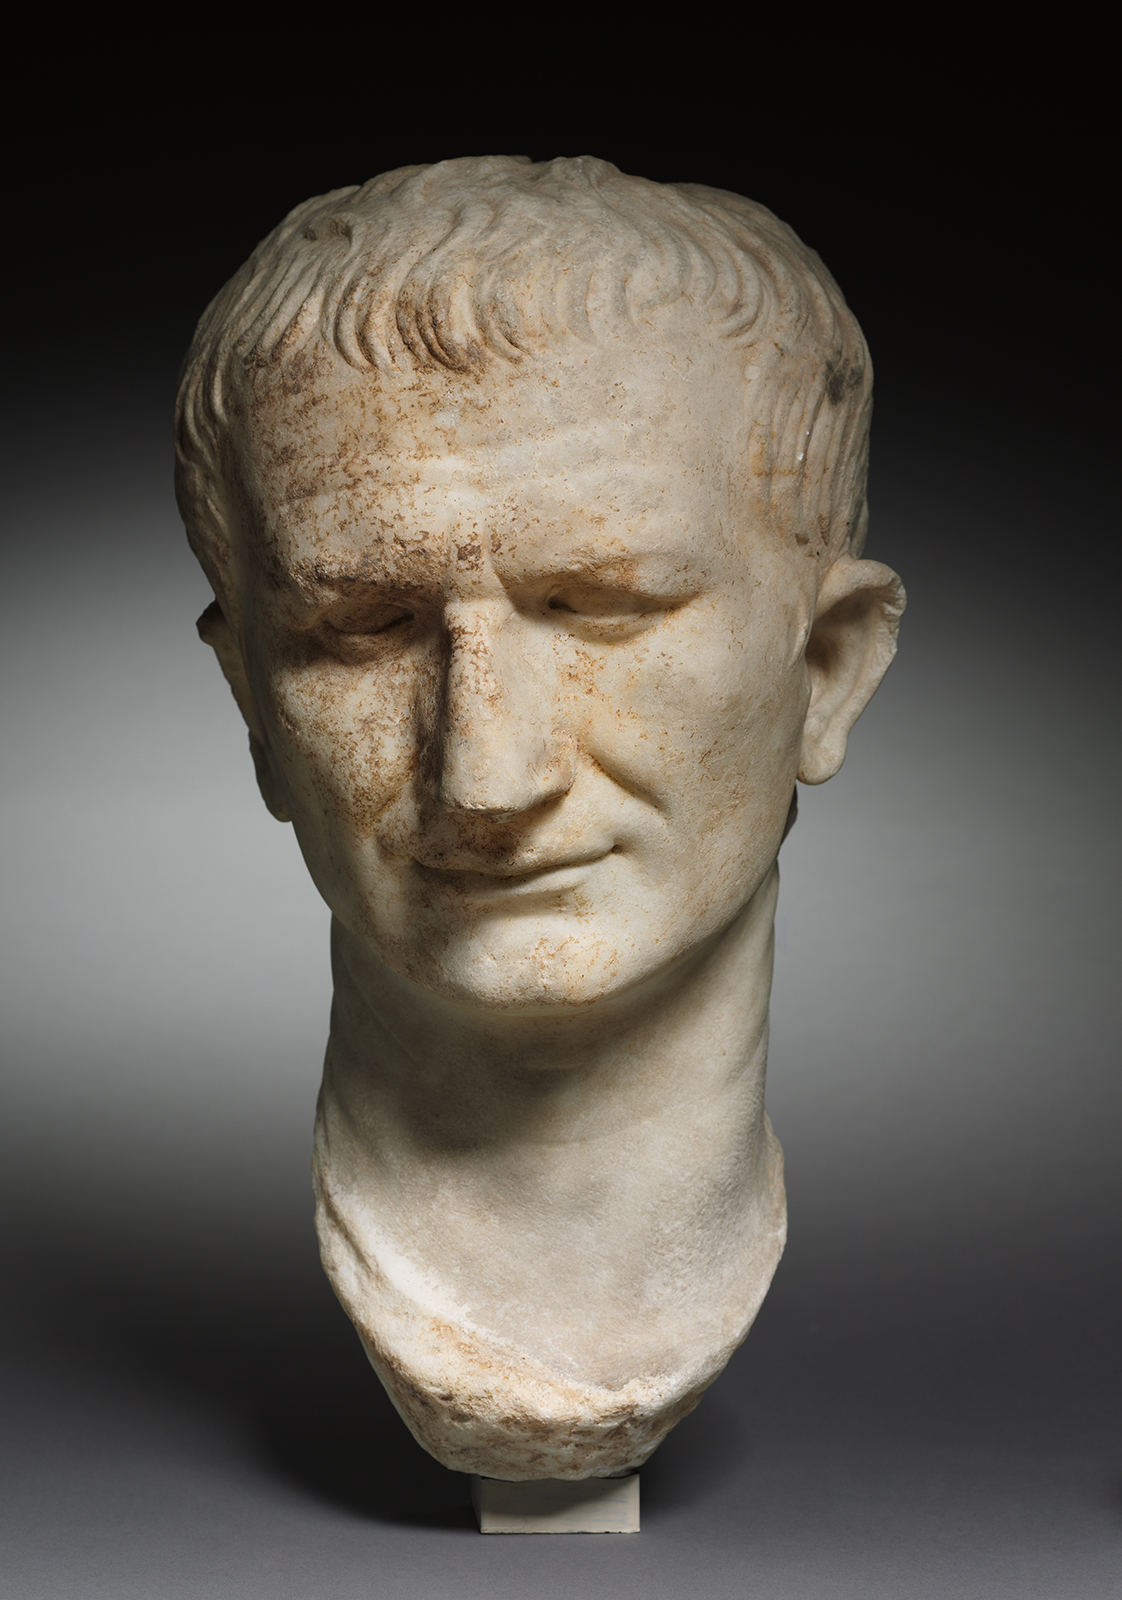 A marble bust of a man's head and neck